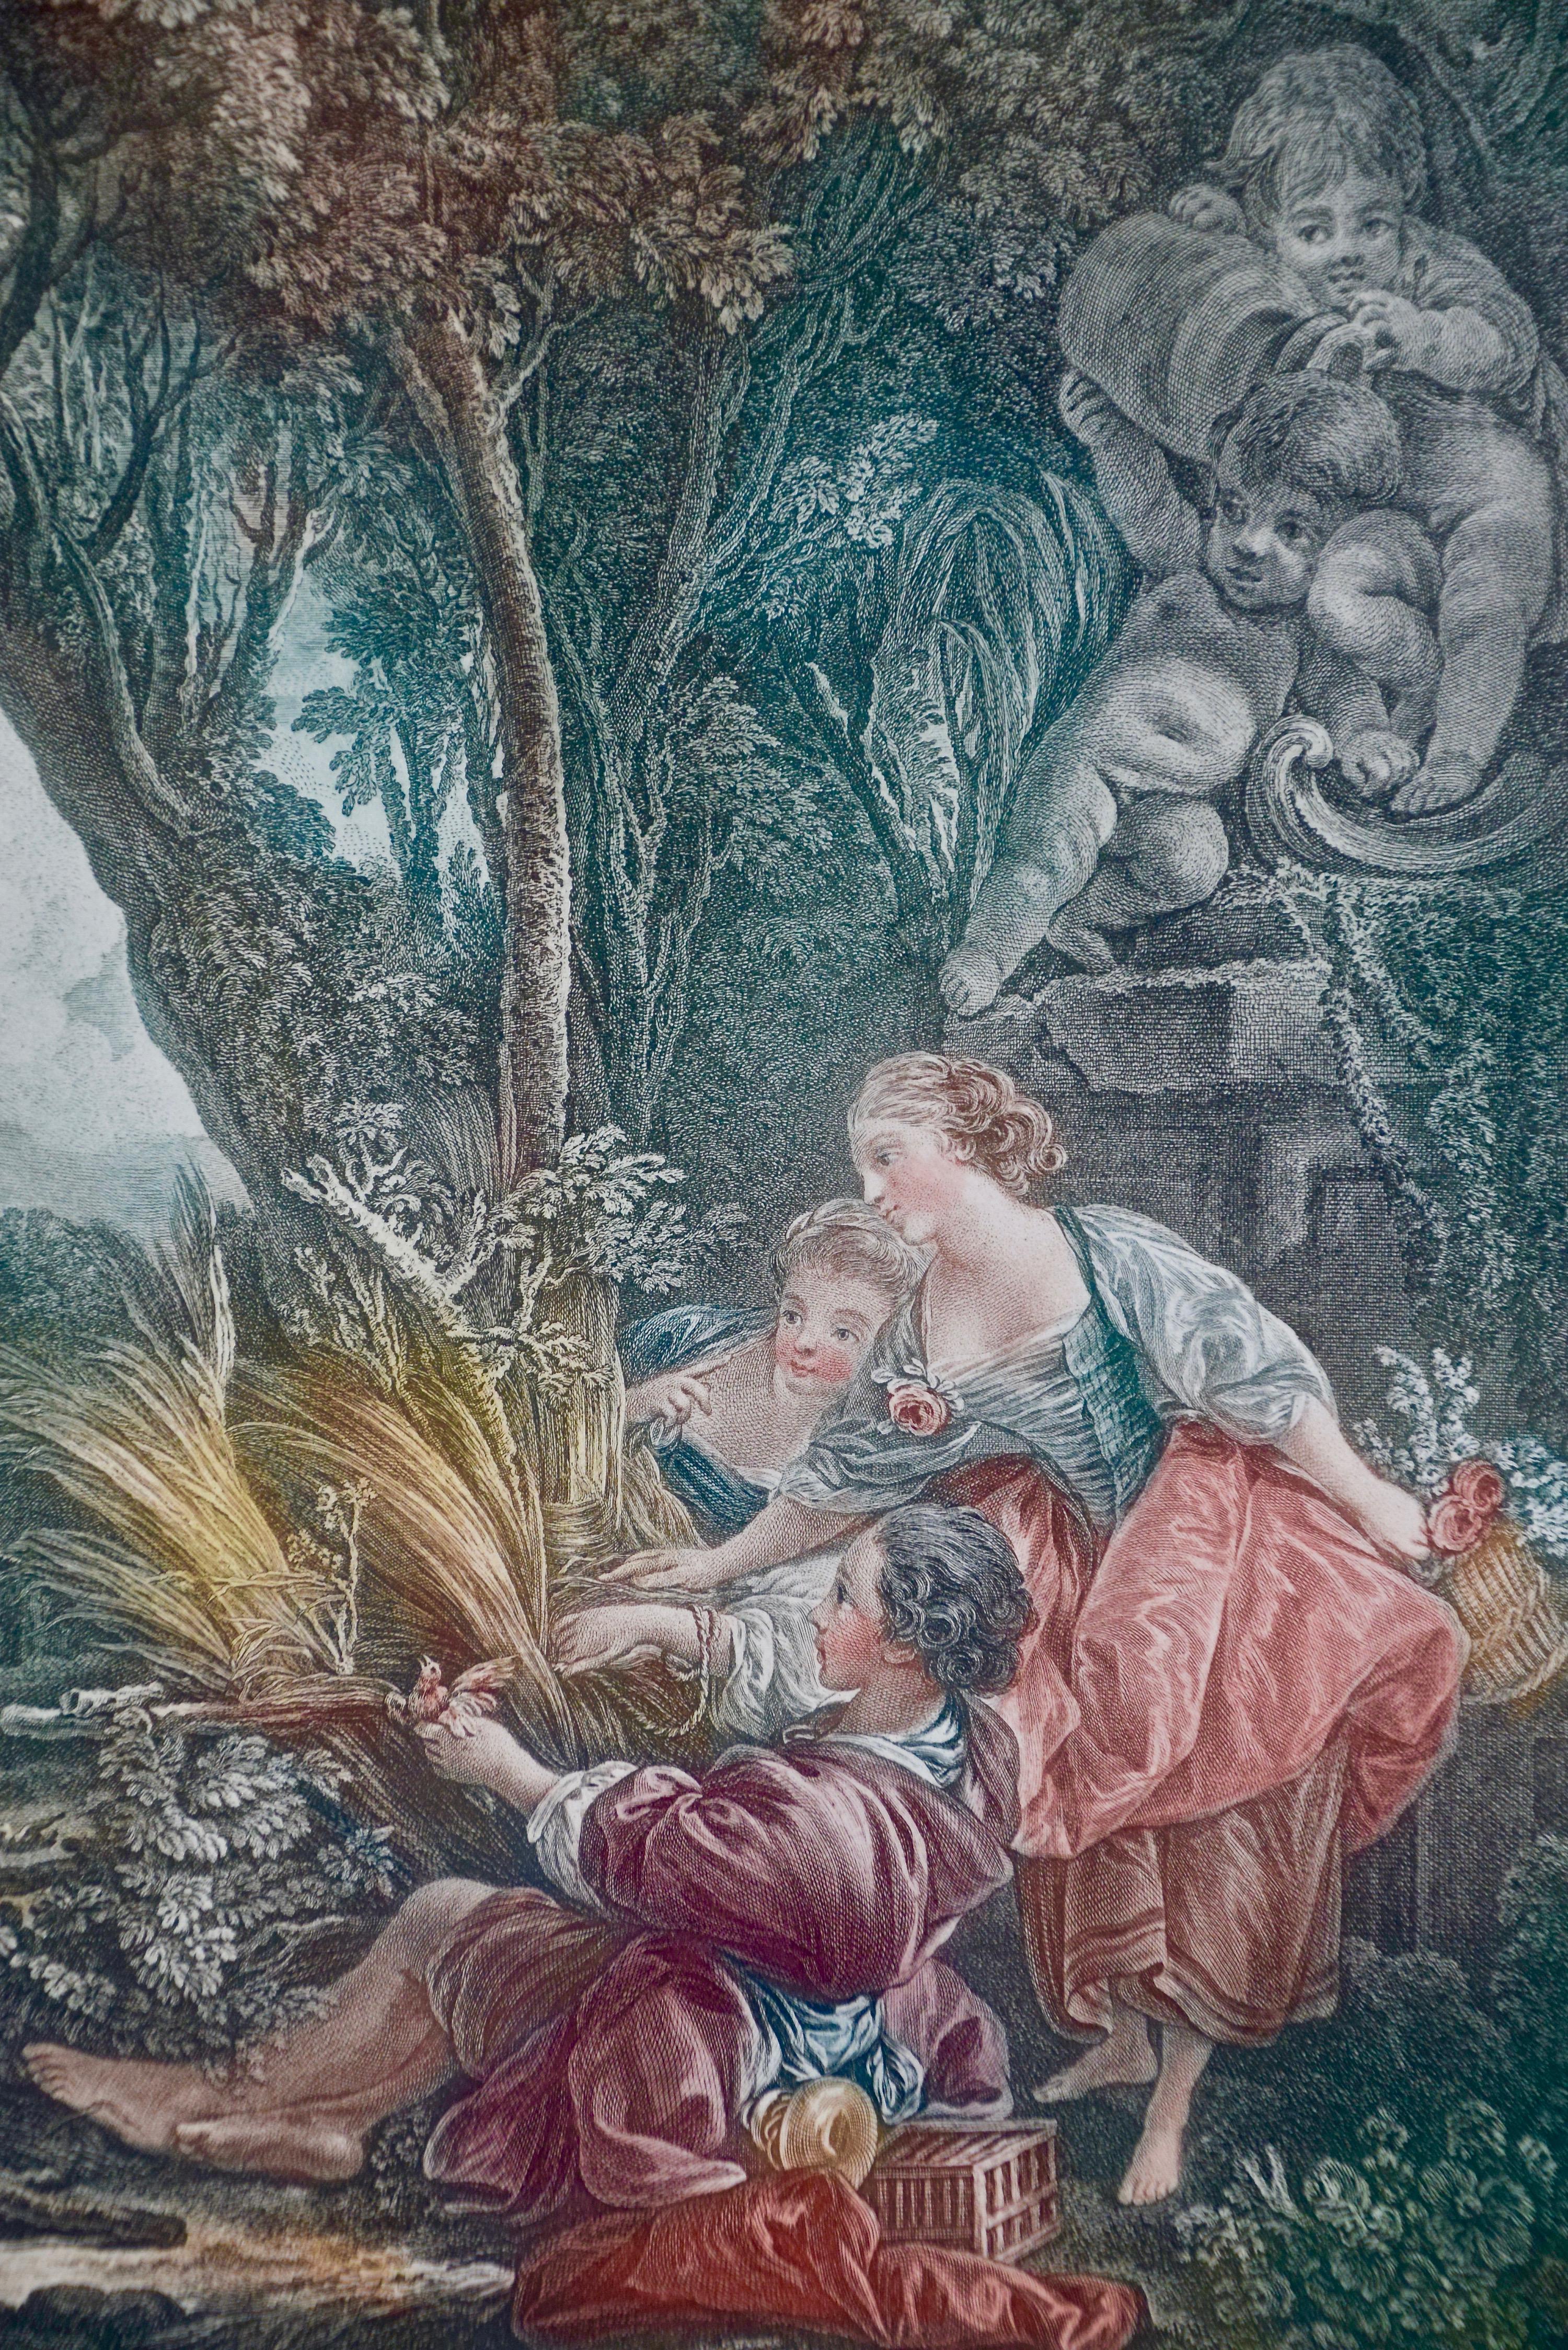 
A pair of French classical romantic prints original created in the 18th century by Jacques-Firmin Beauvarlet (1731-1797) after paintings by Francois Boucher  (1703-1770), utilizing both etching and engraving techniques. The exact date of the